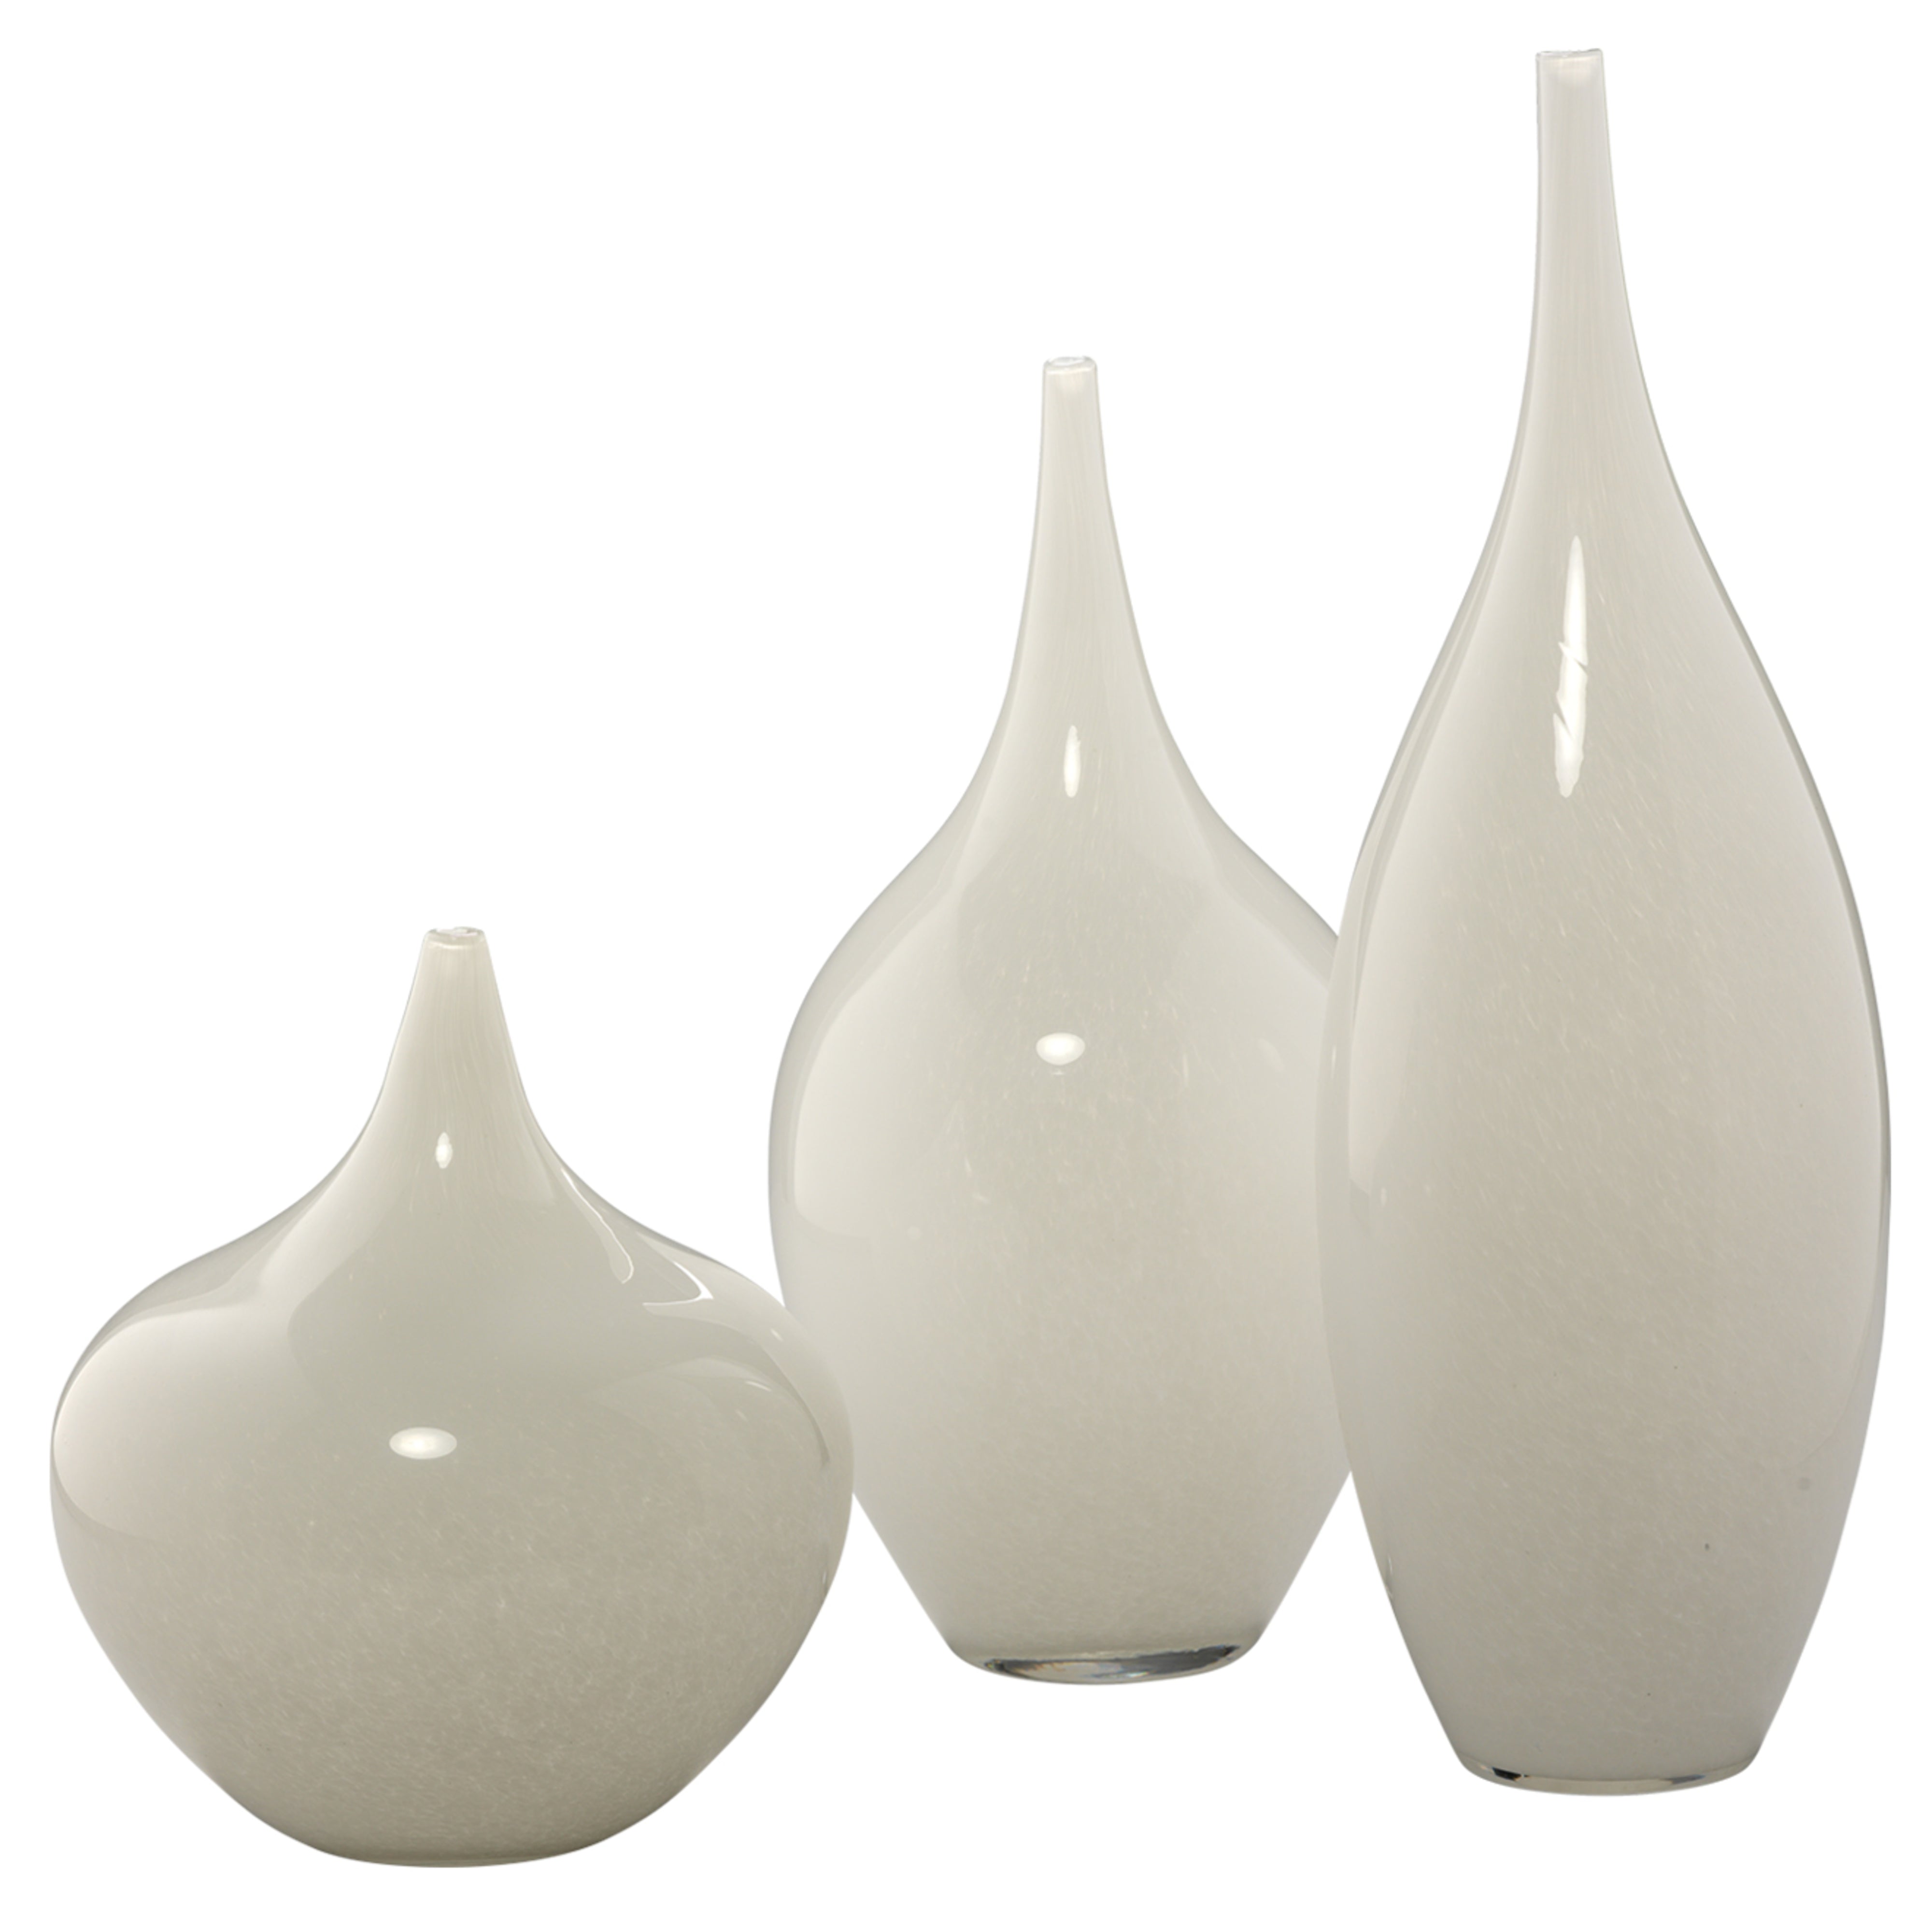 Jamie Young Company - 7NYMP-VAWH - Nymph Decorative Vases (set of 3) - Nymph - White